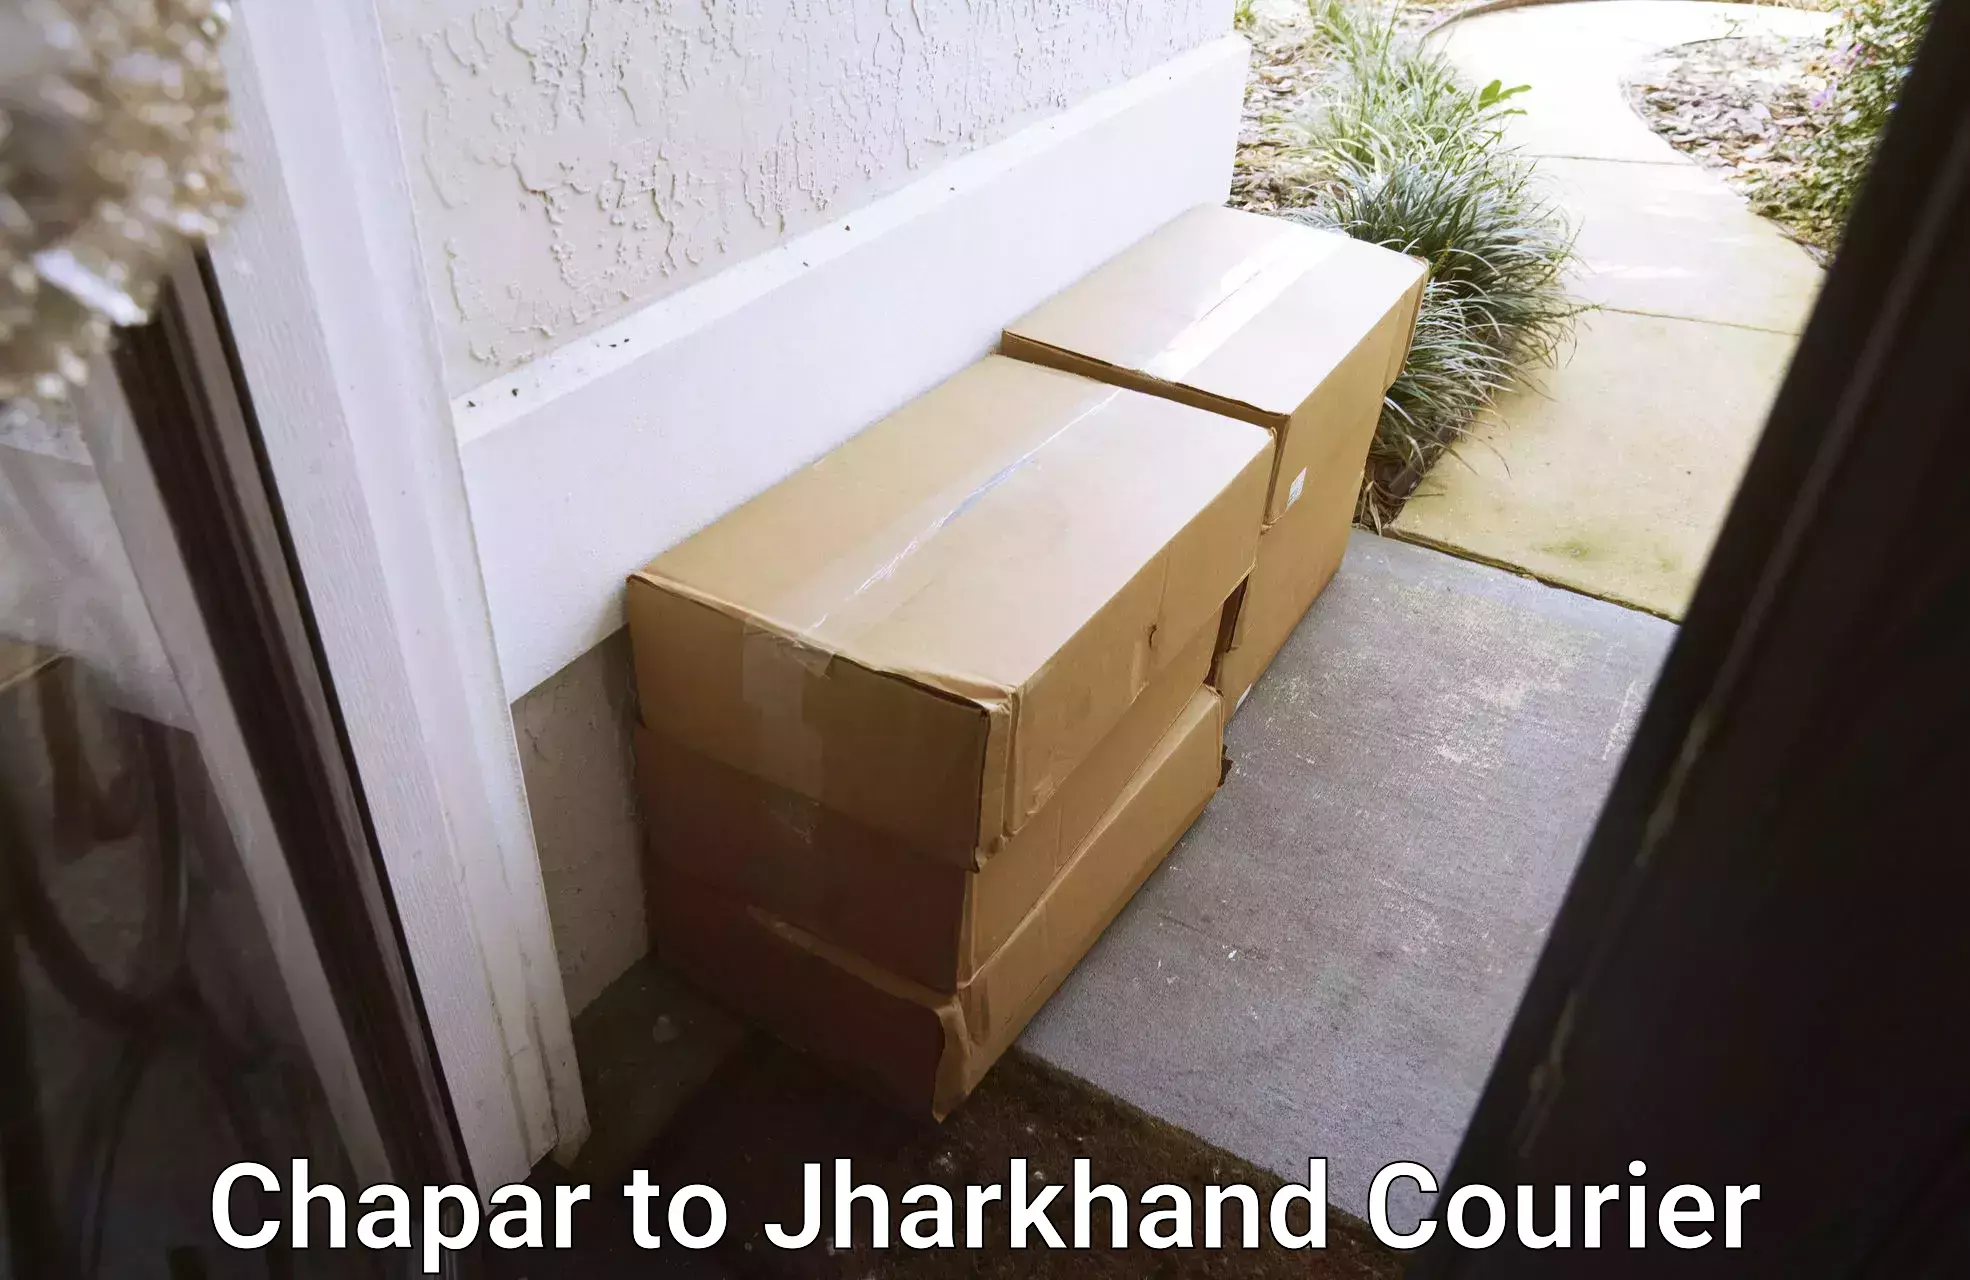 Advanced shipping network Chapar to Jharkhand